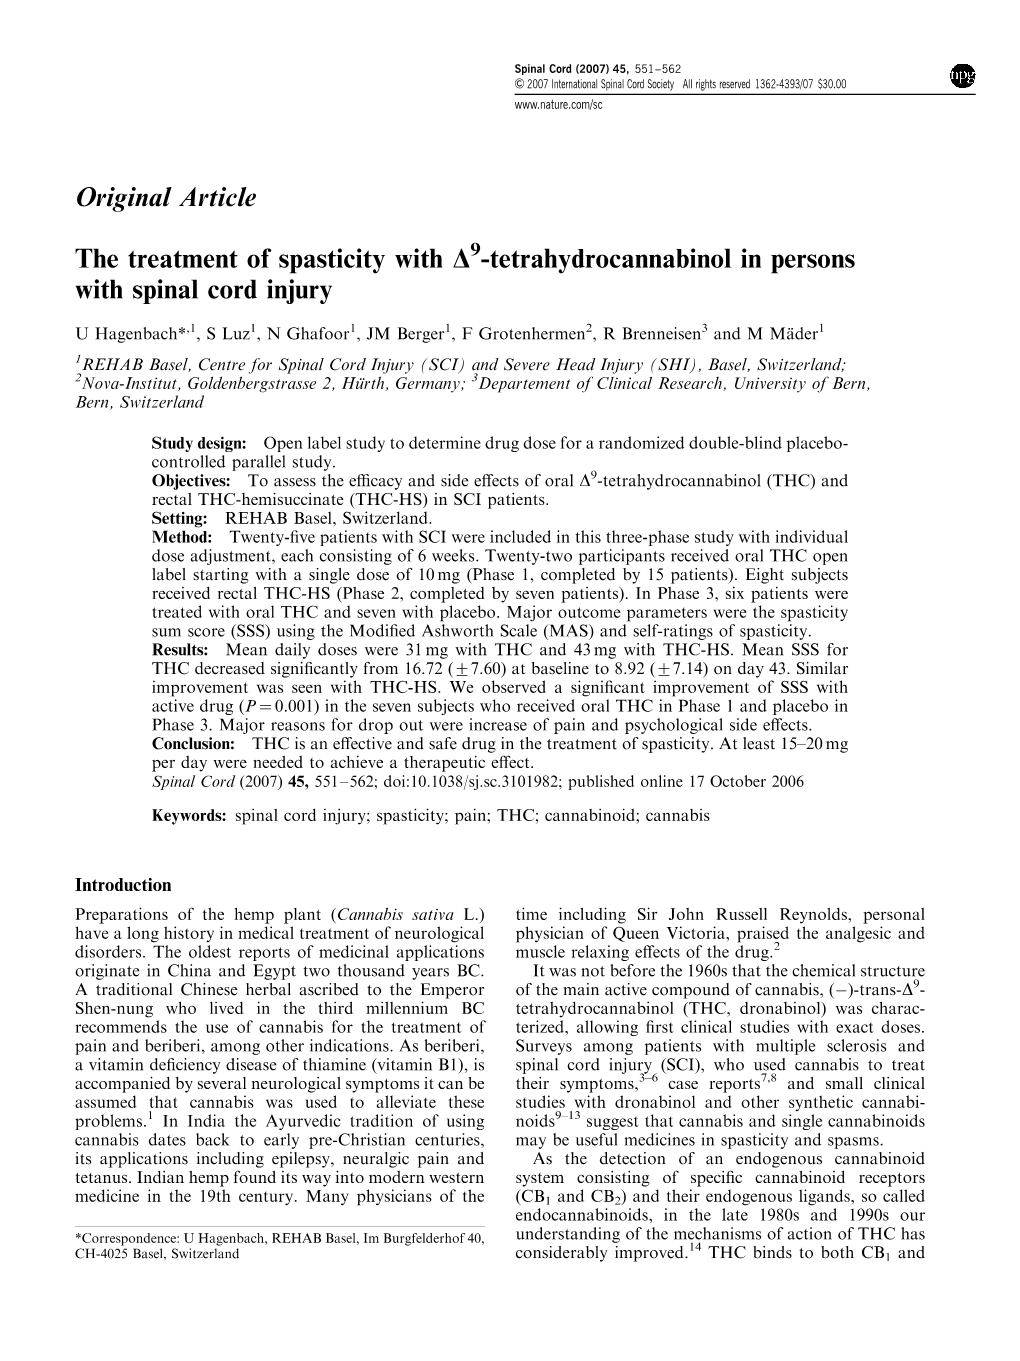 The Treatment of Spasticity with Δ 9-Tetrahydrocannabinol in Persons